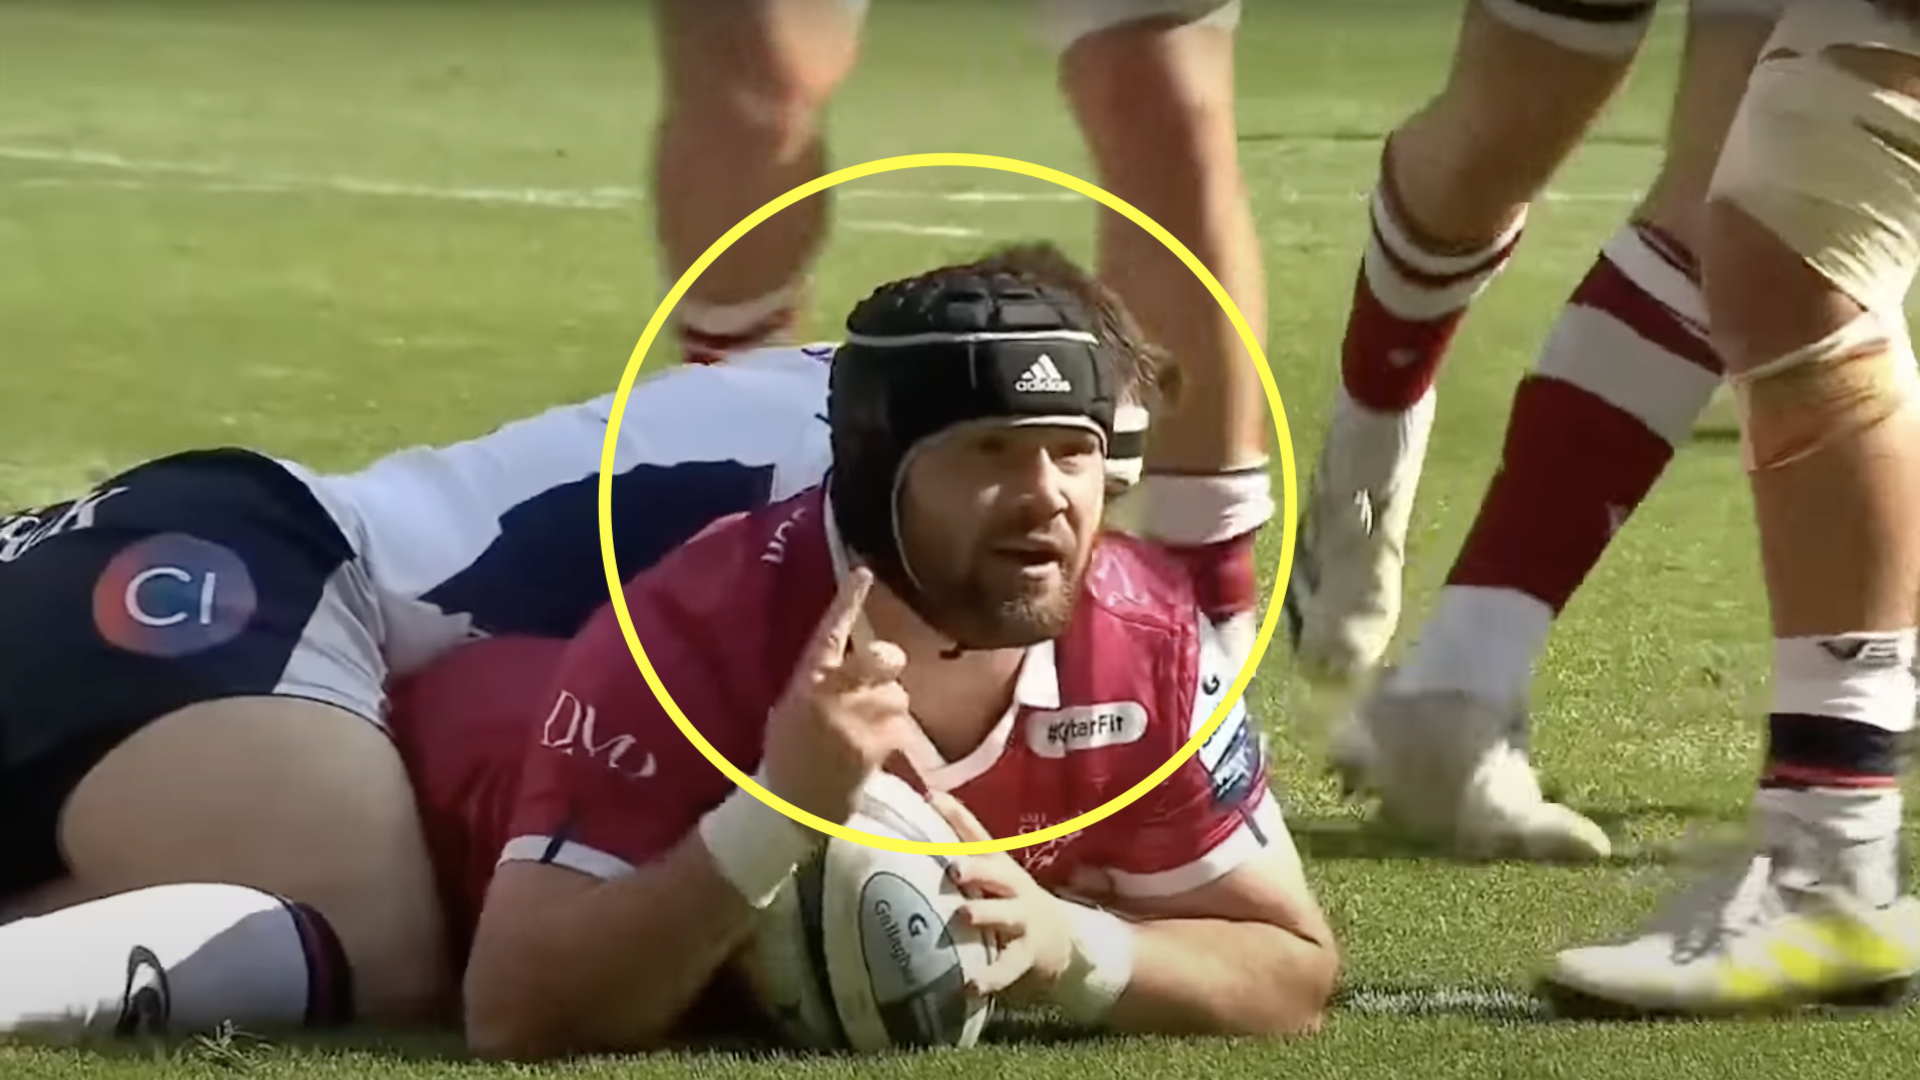 England prop outcast would walk into All Blacks front row with this act of class